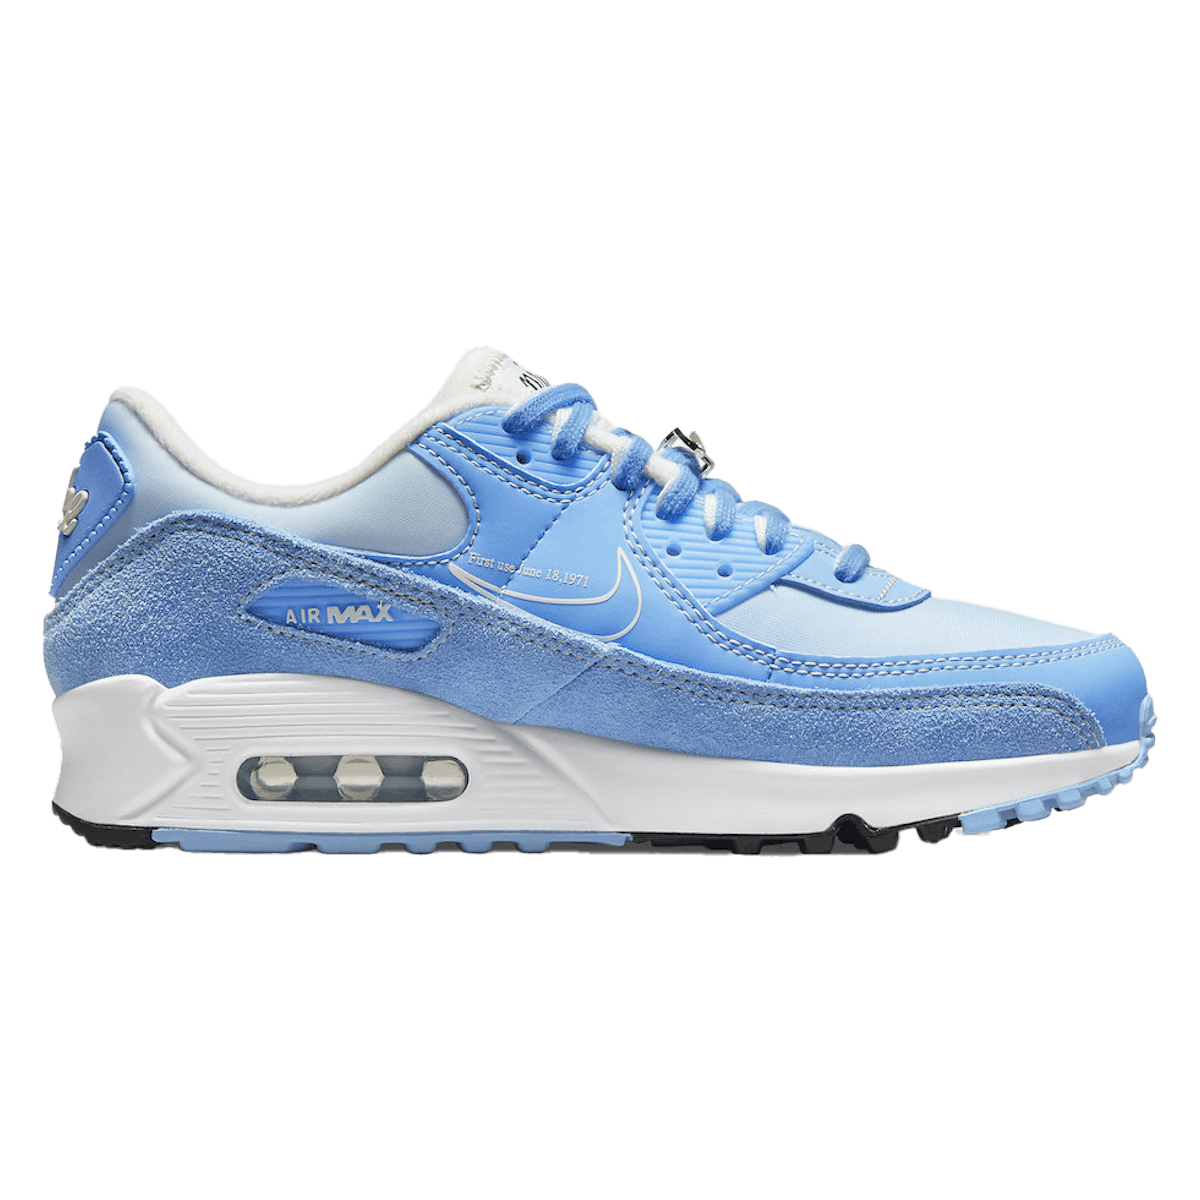 Nike Air Max 90 First Use "University Blue"